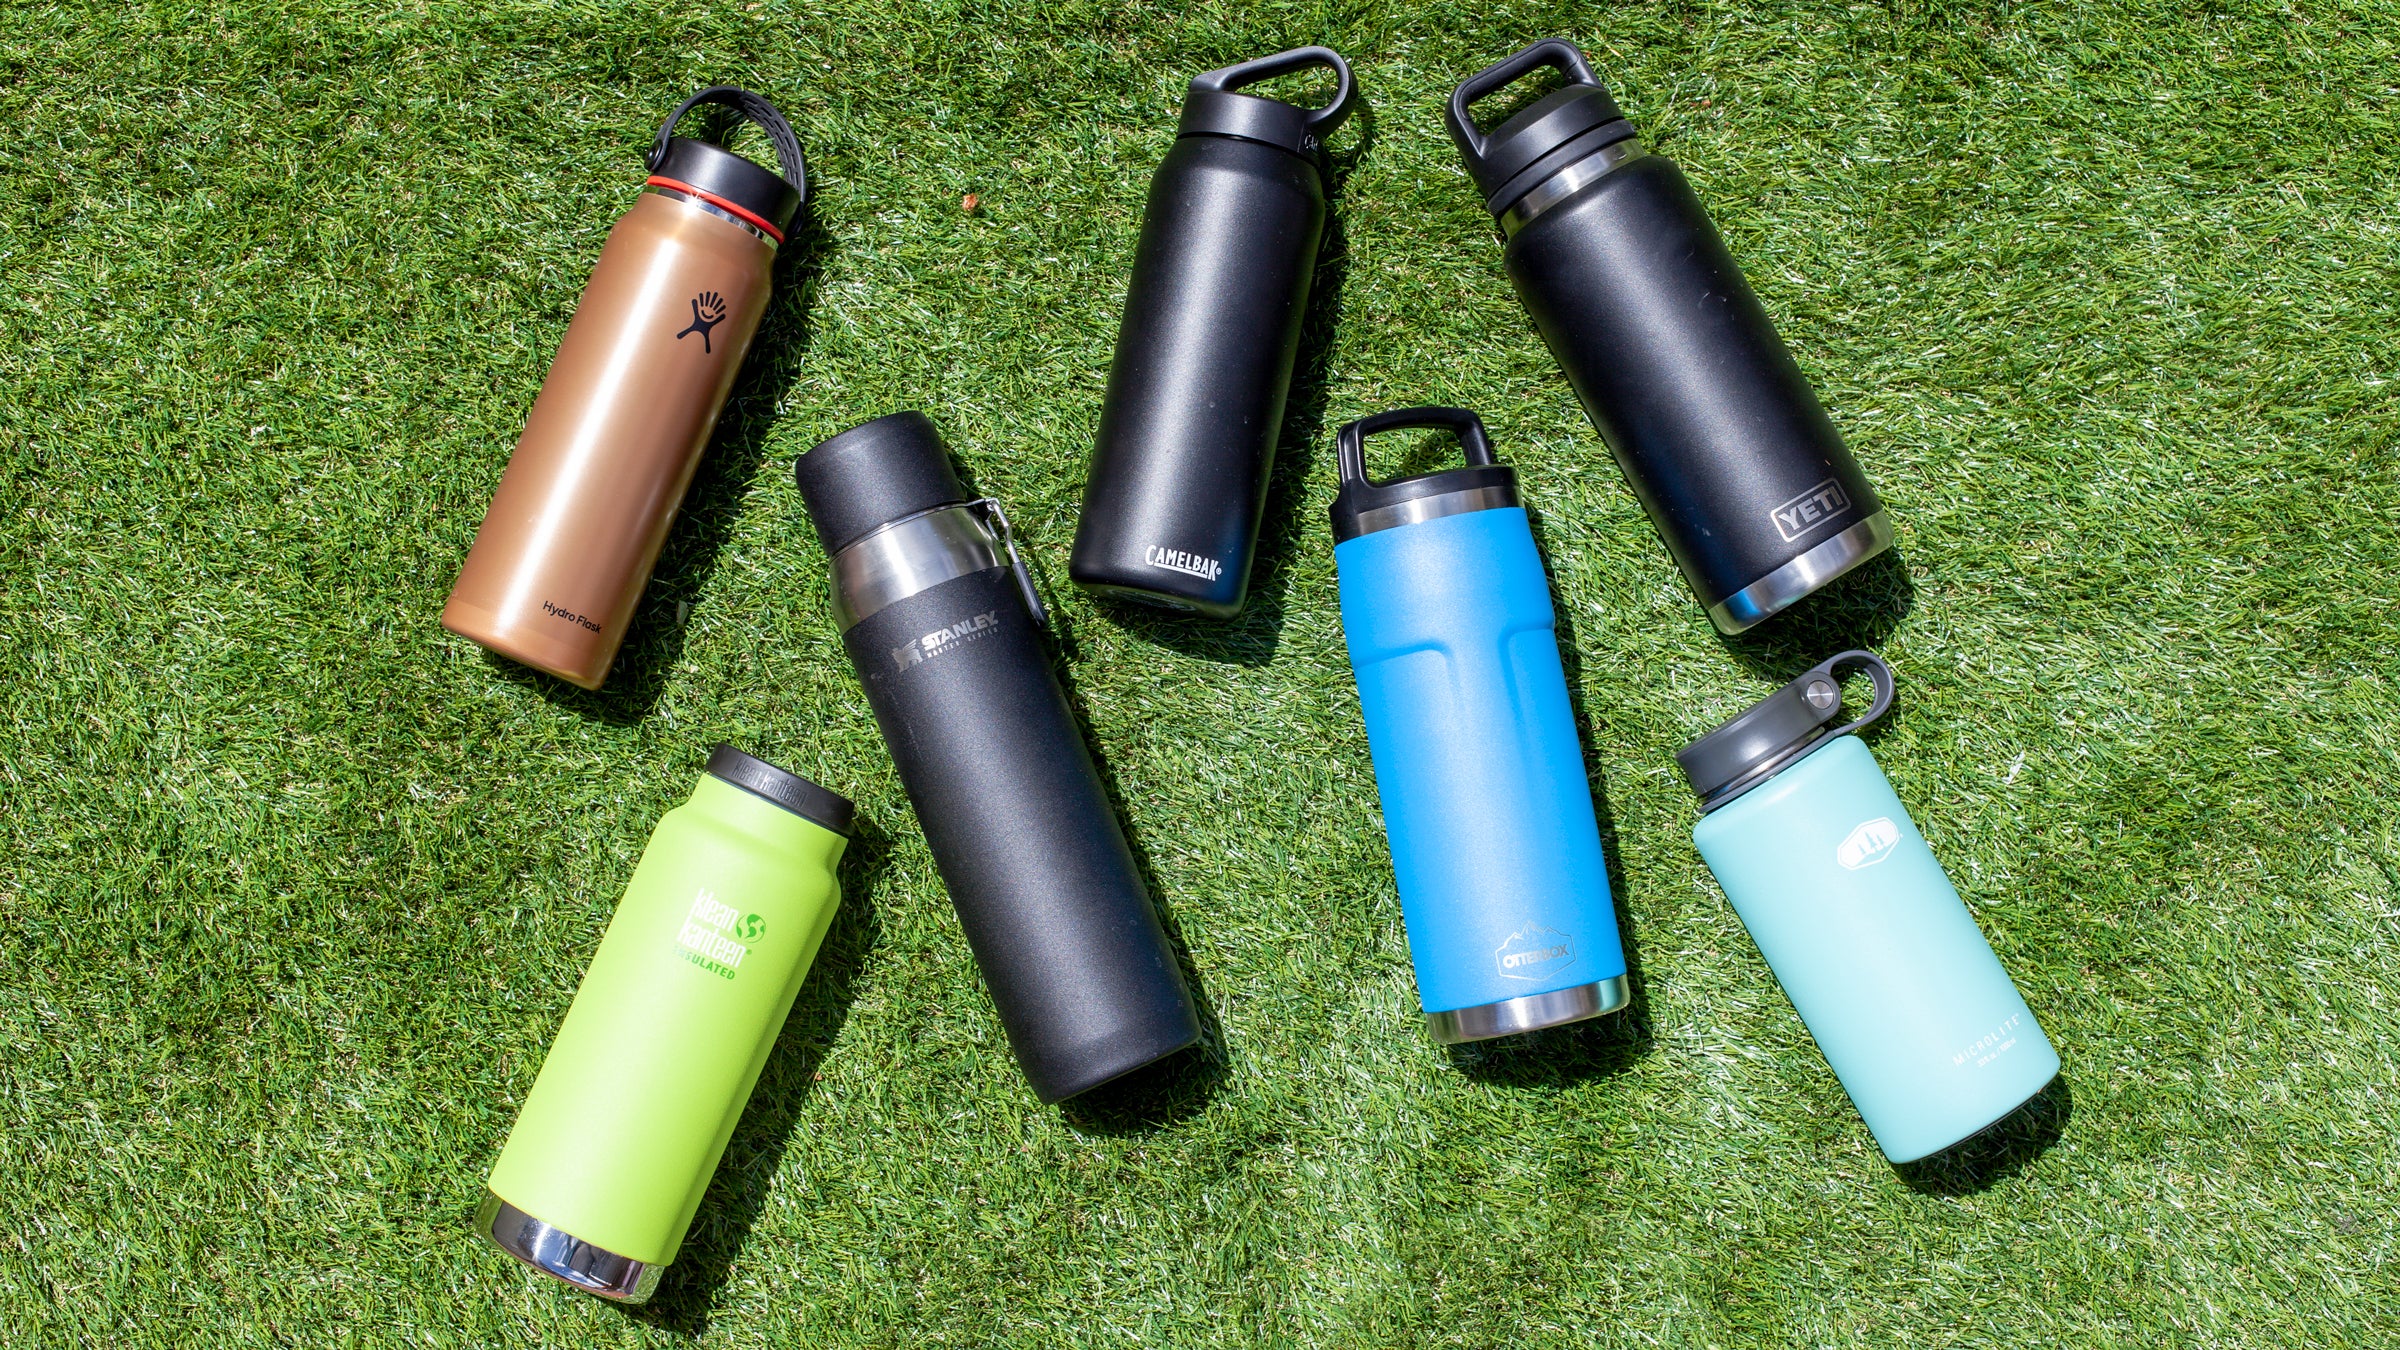 Gear Review: Hydroflask Tumblers, Bottles, and Food Containers